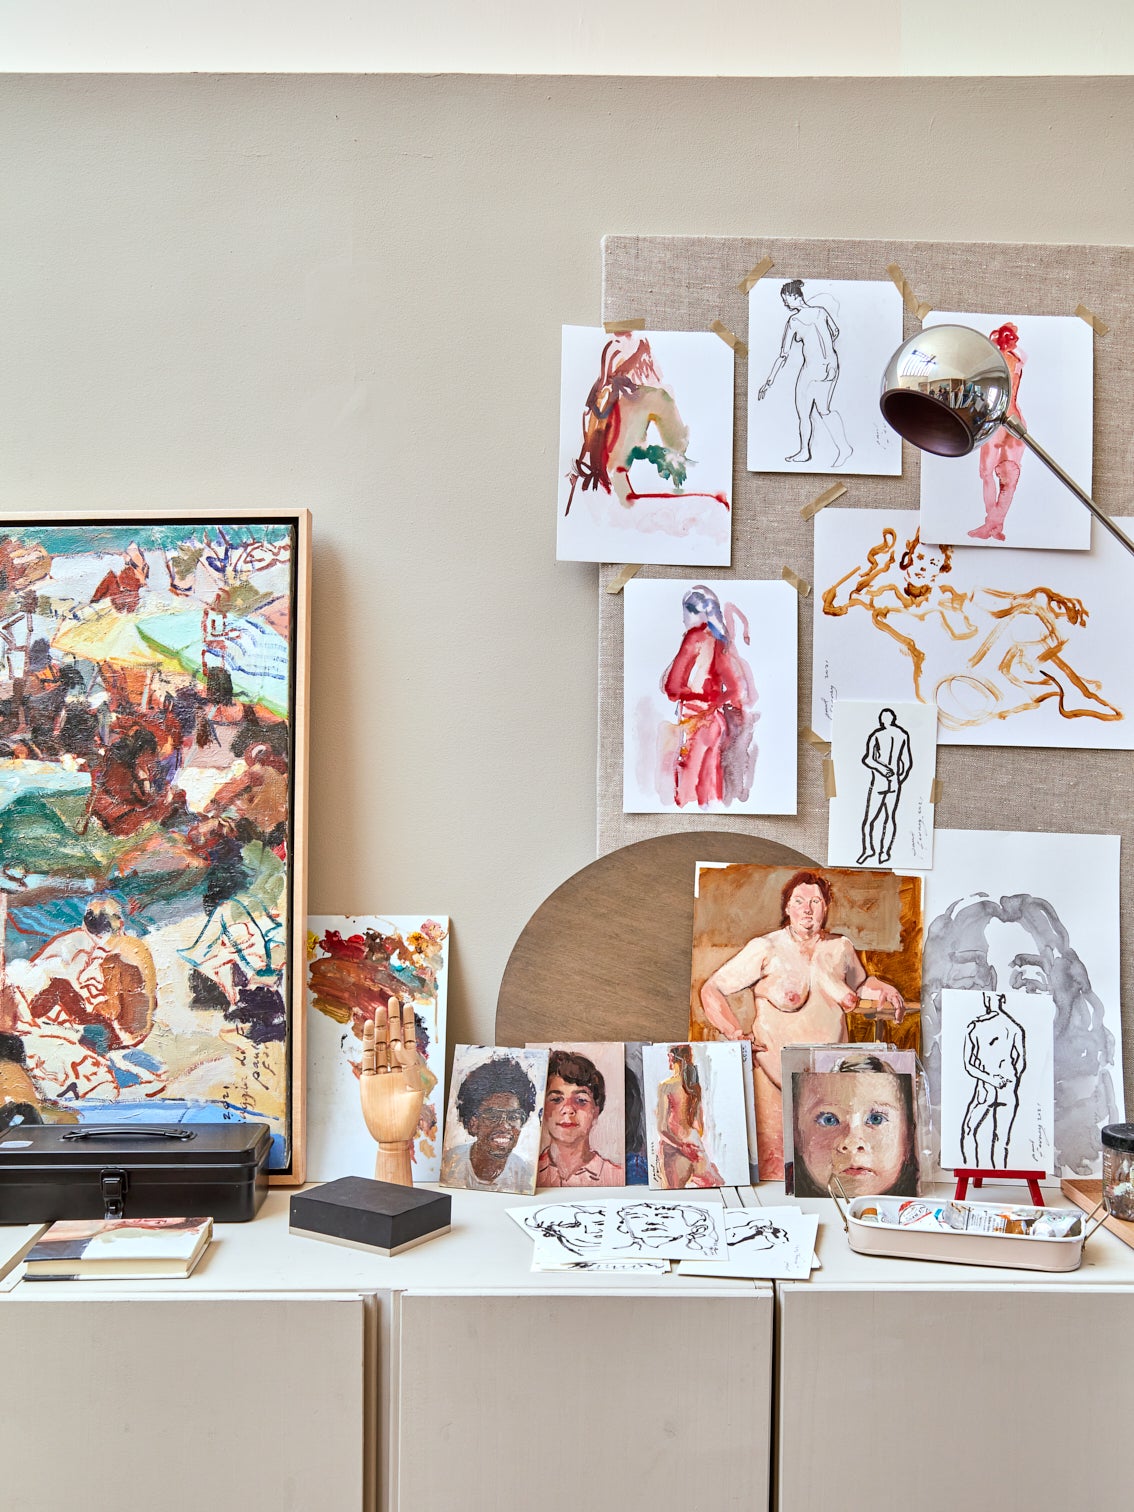 IKEA Storage Doubles as a Paint Easel in Jordan Ferney's Apartment